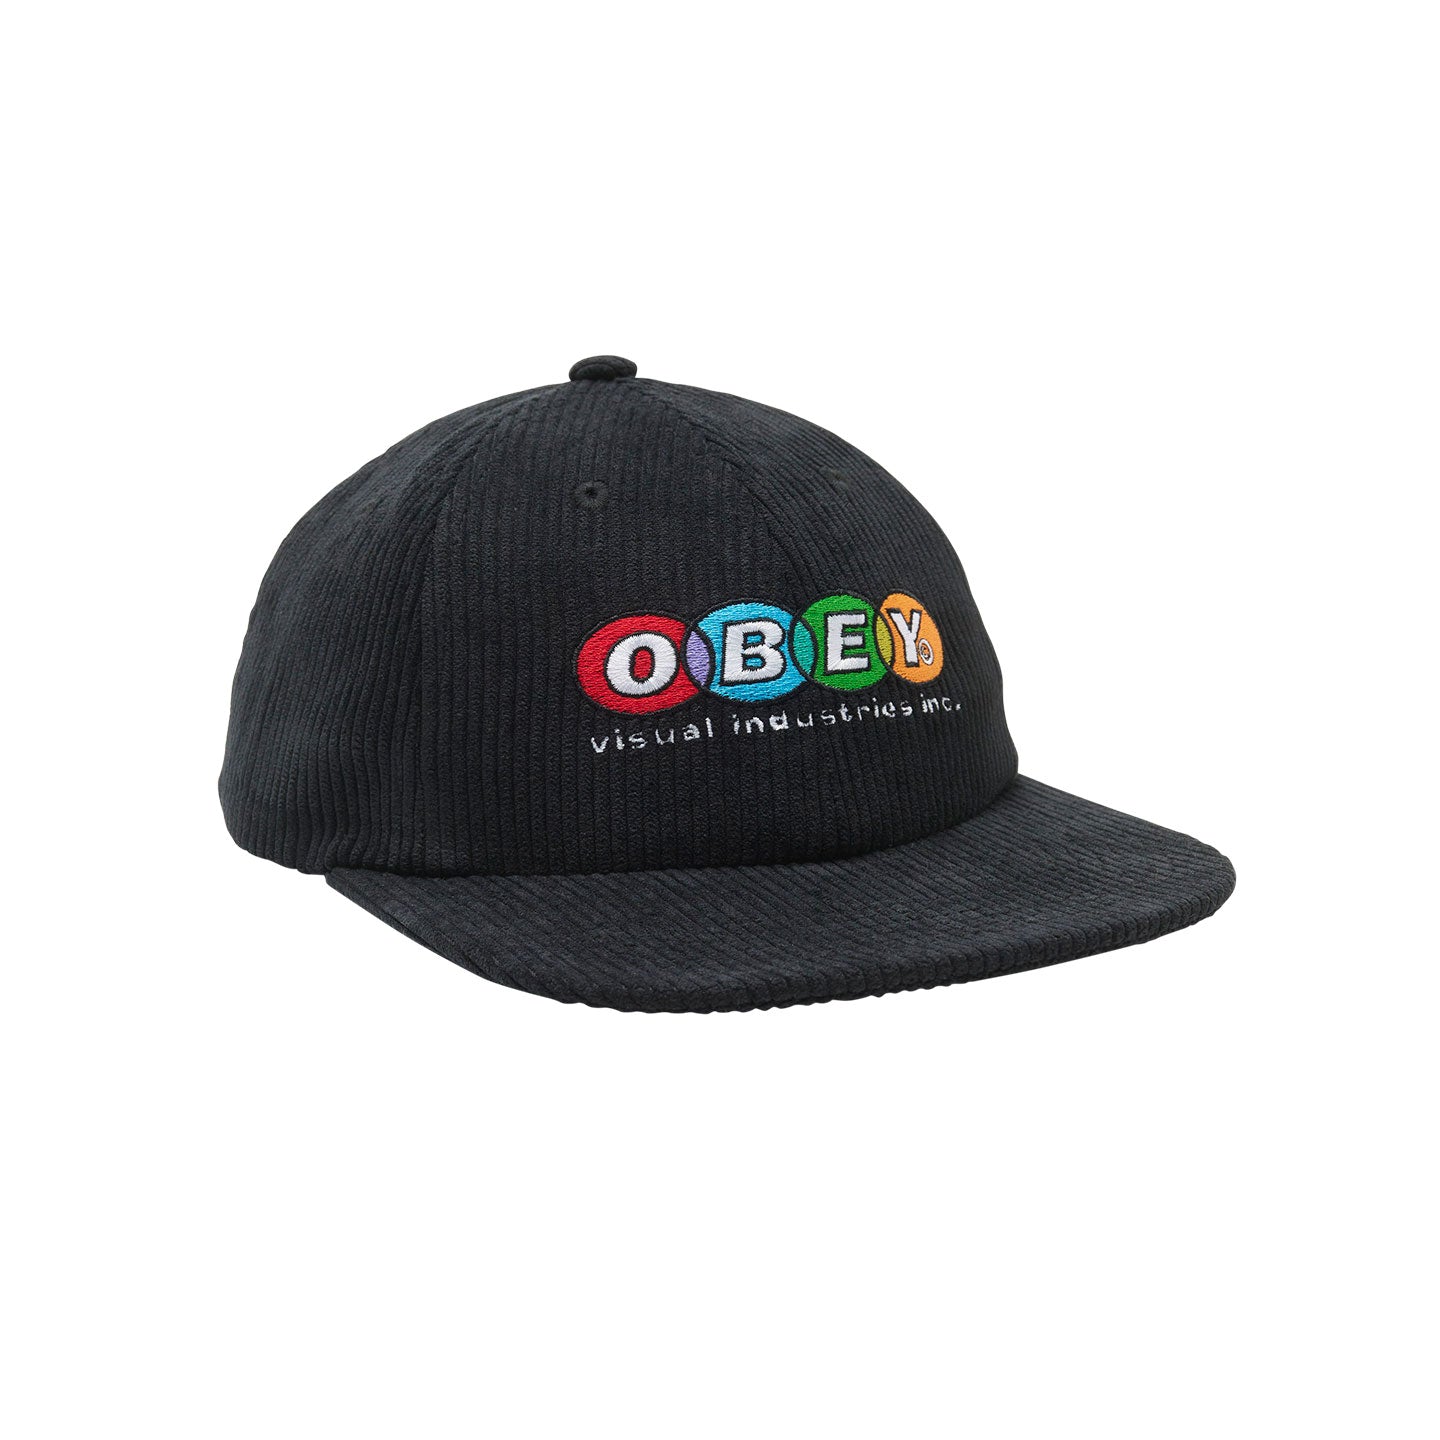 OBEY Industries 6 Panel Snap